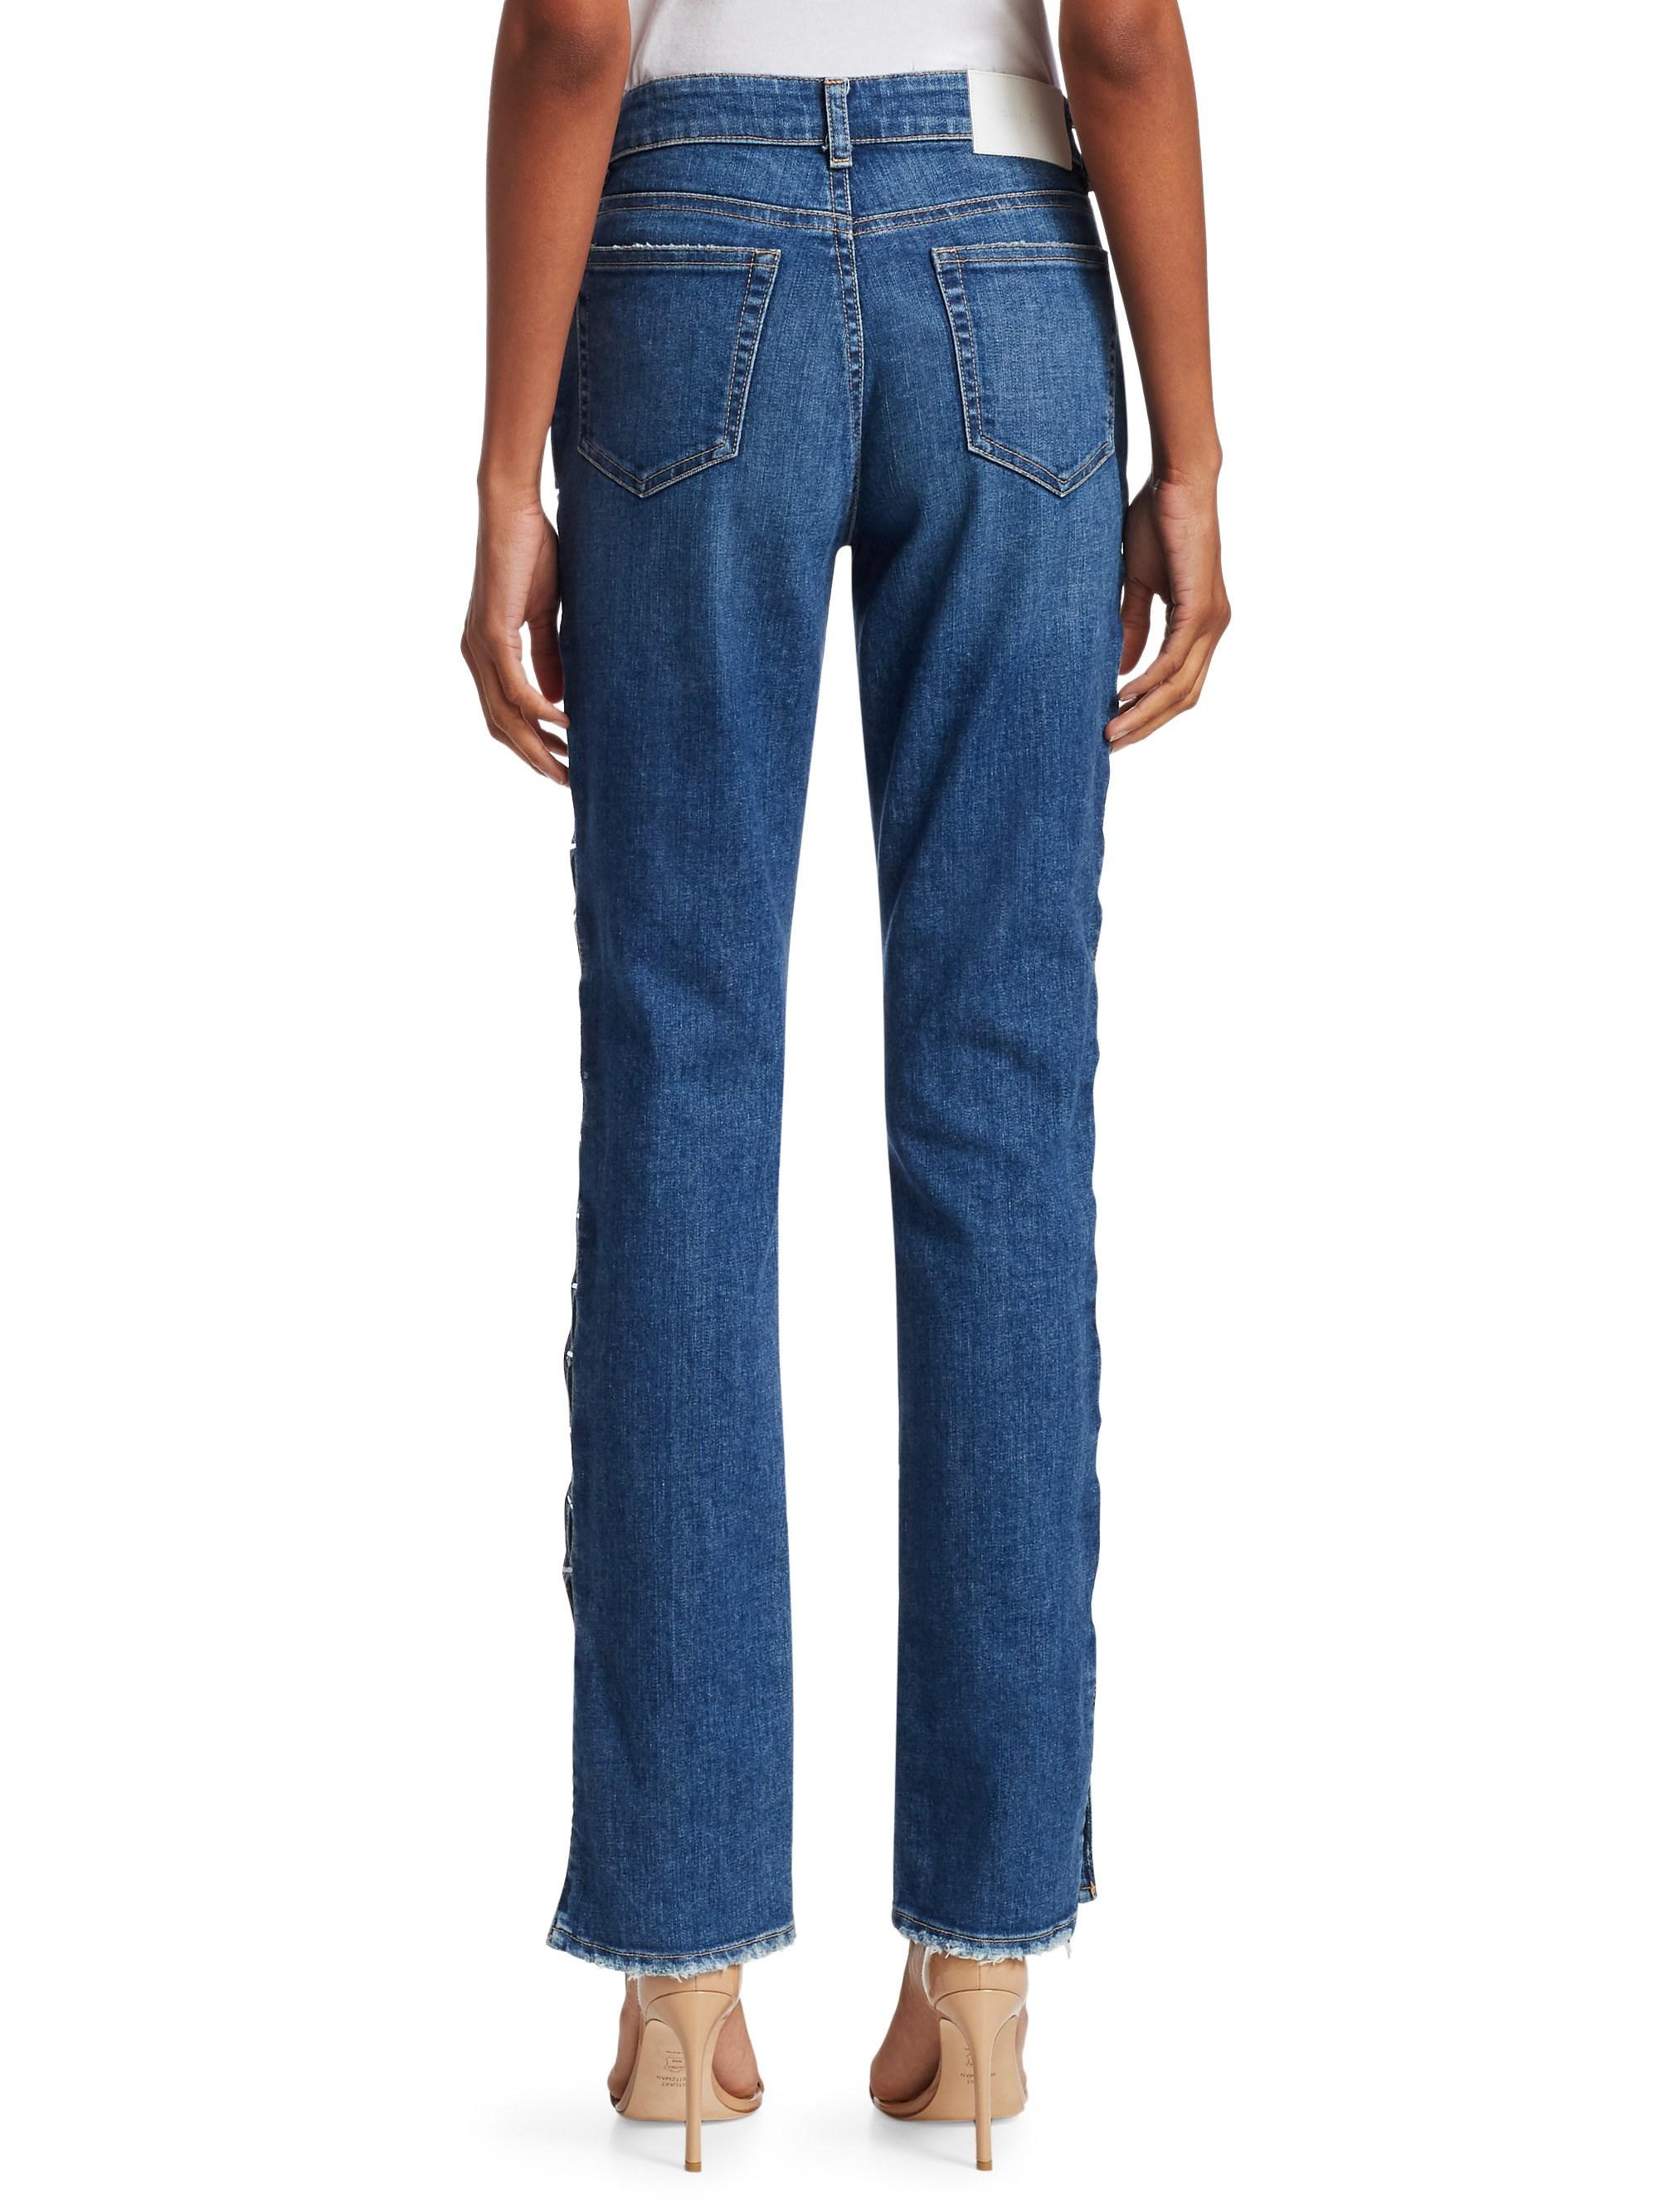 Jonathan Simkhai Stove Pipe High-rise Jeans in Blue - Lyst